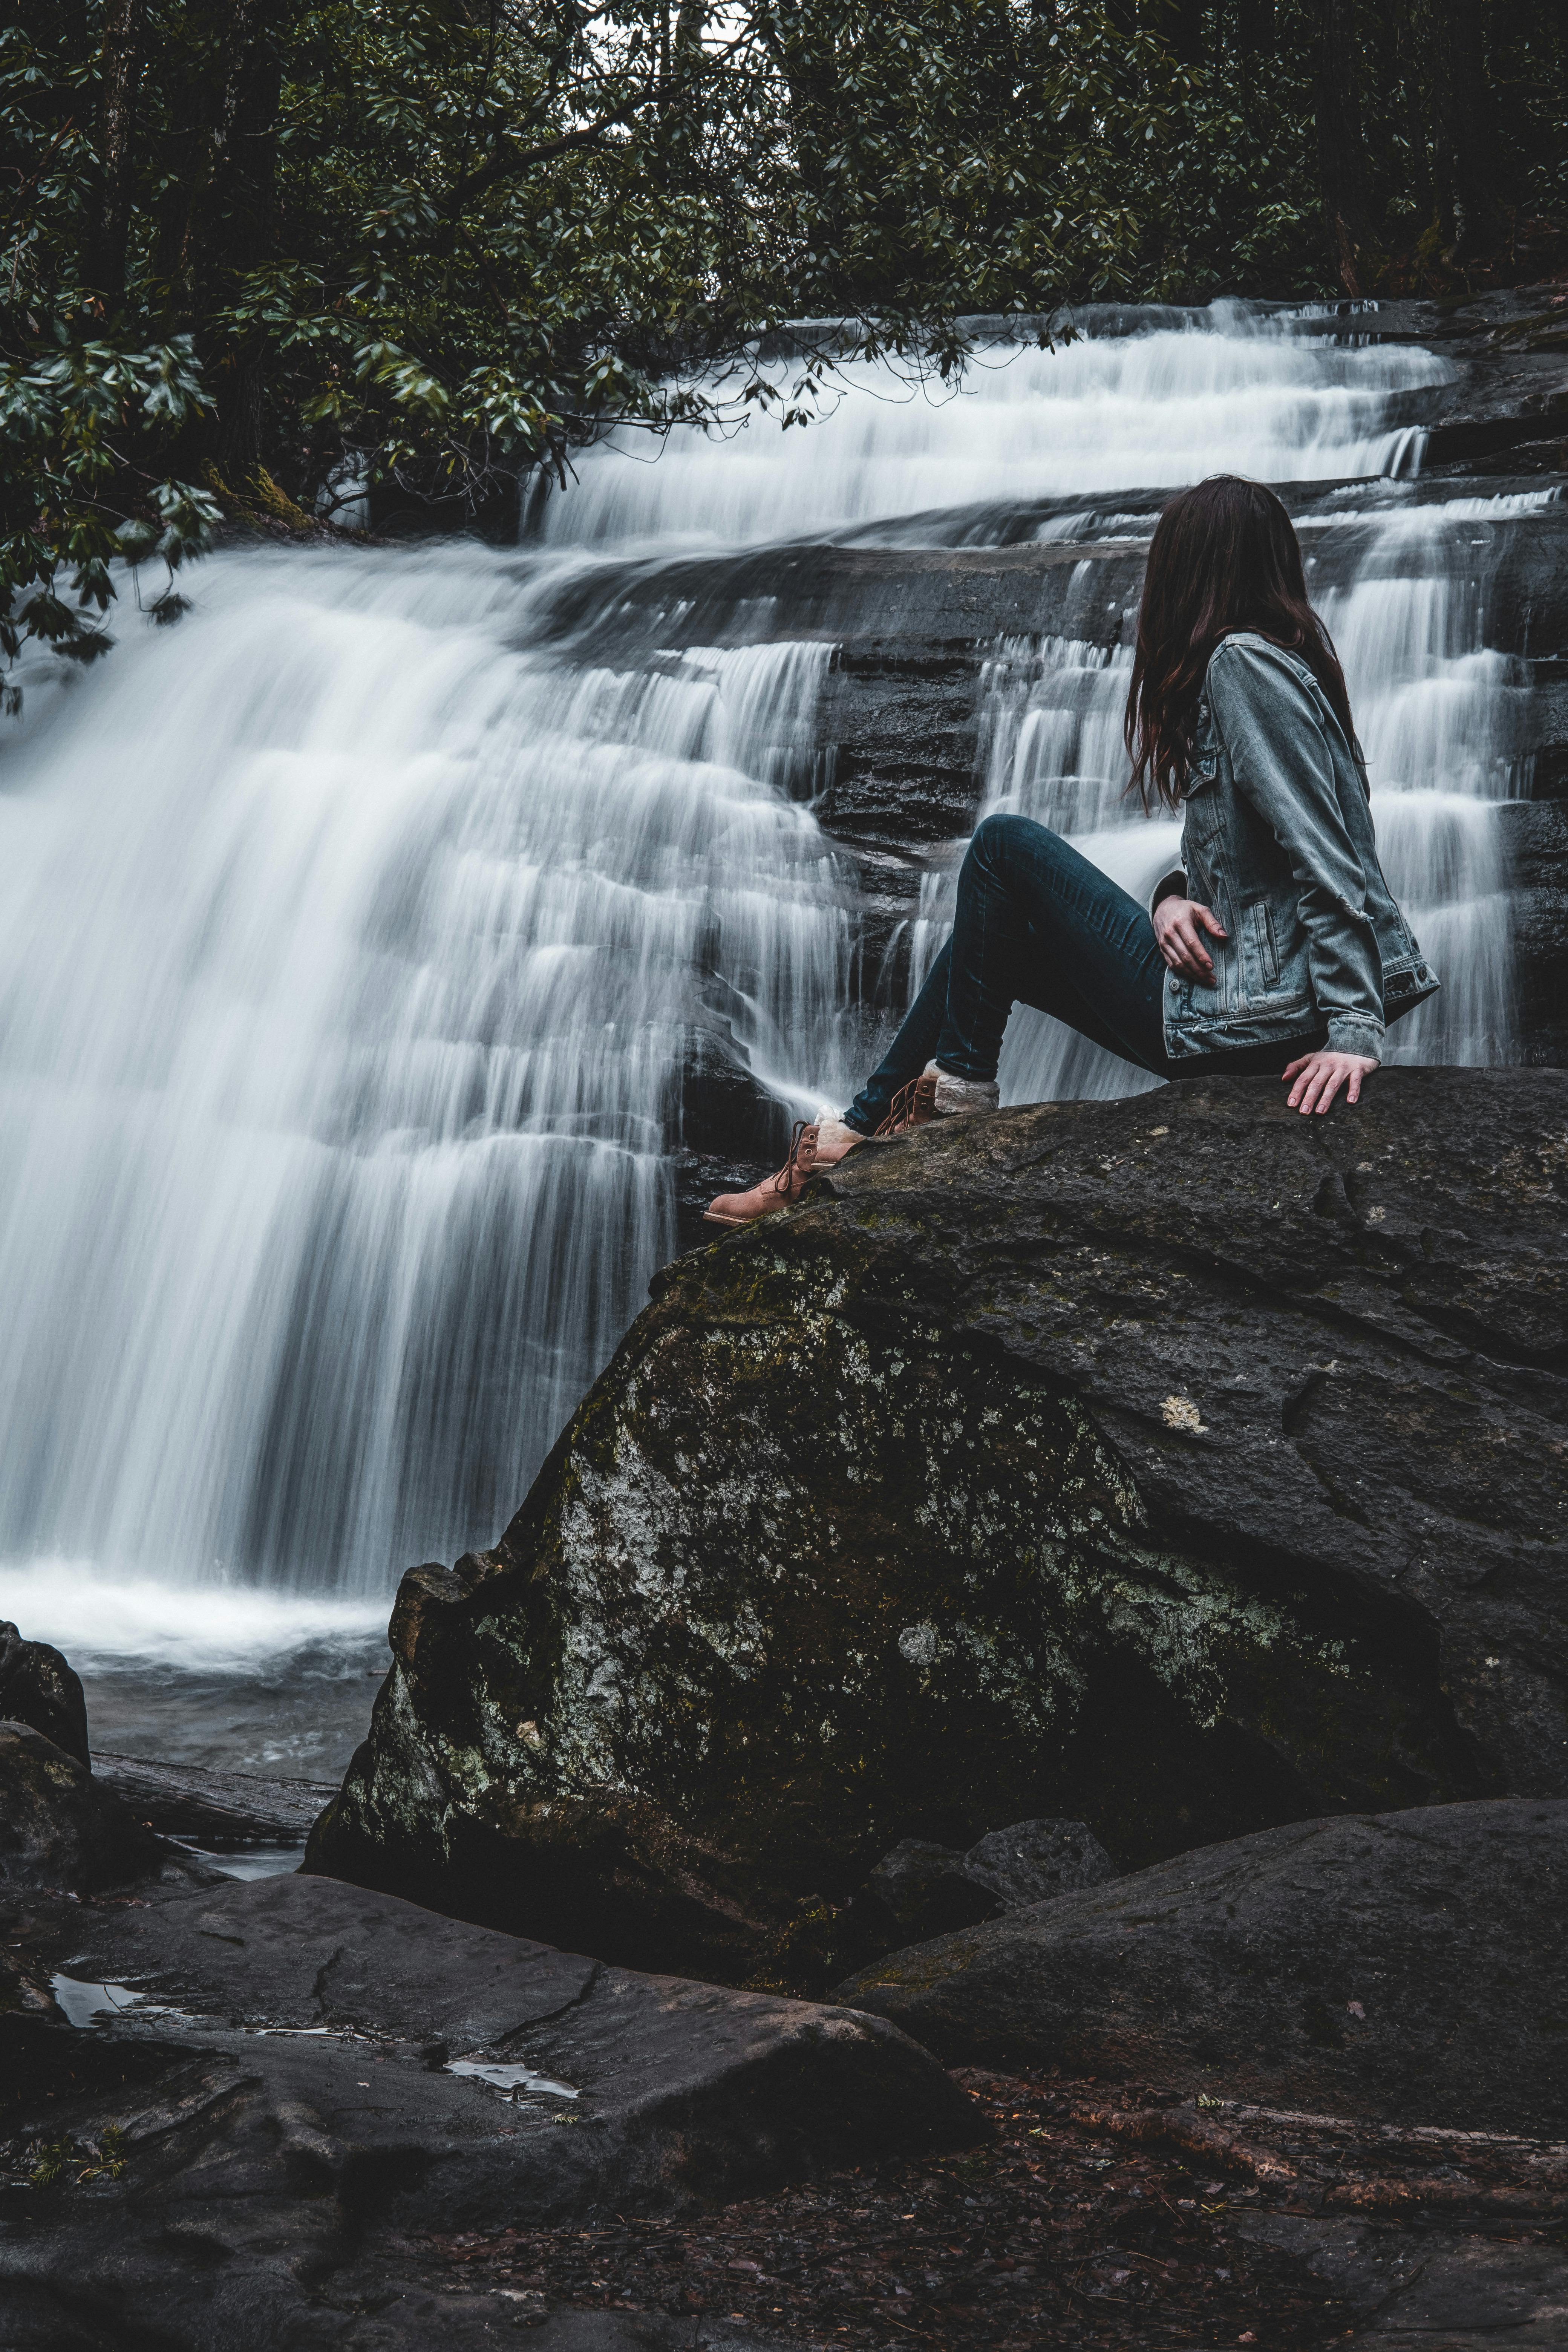 Waterfall Photoshoot Inspiration - Poses and Ideas | Lake photos,  Photography, Photoshoot inspiration